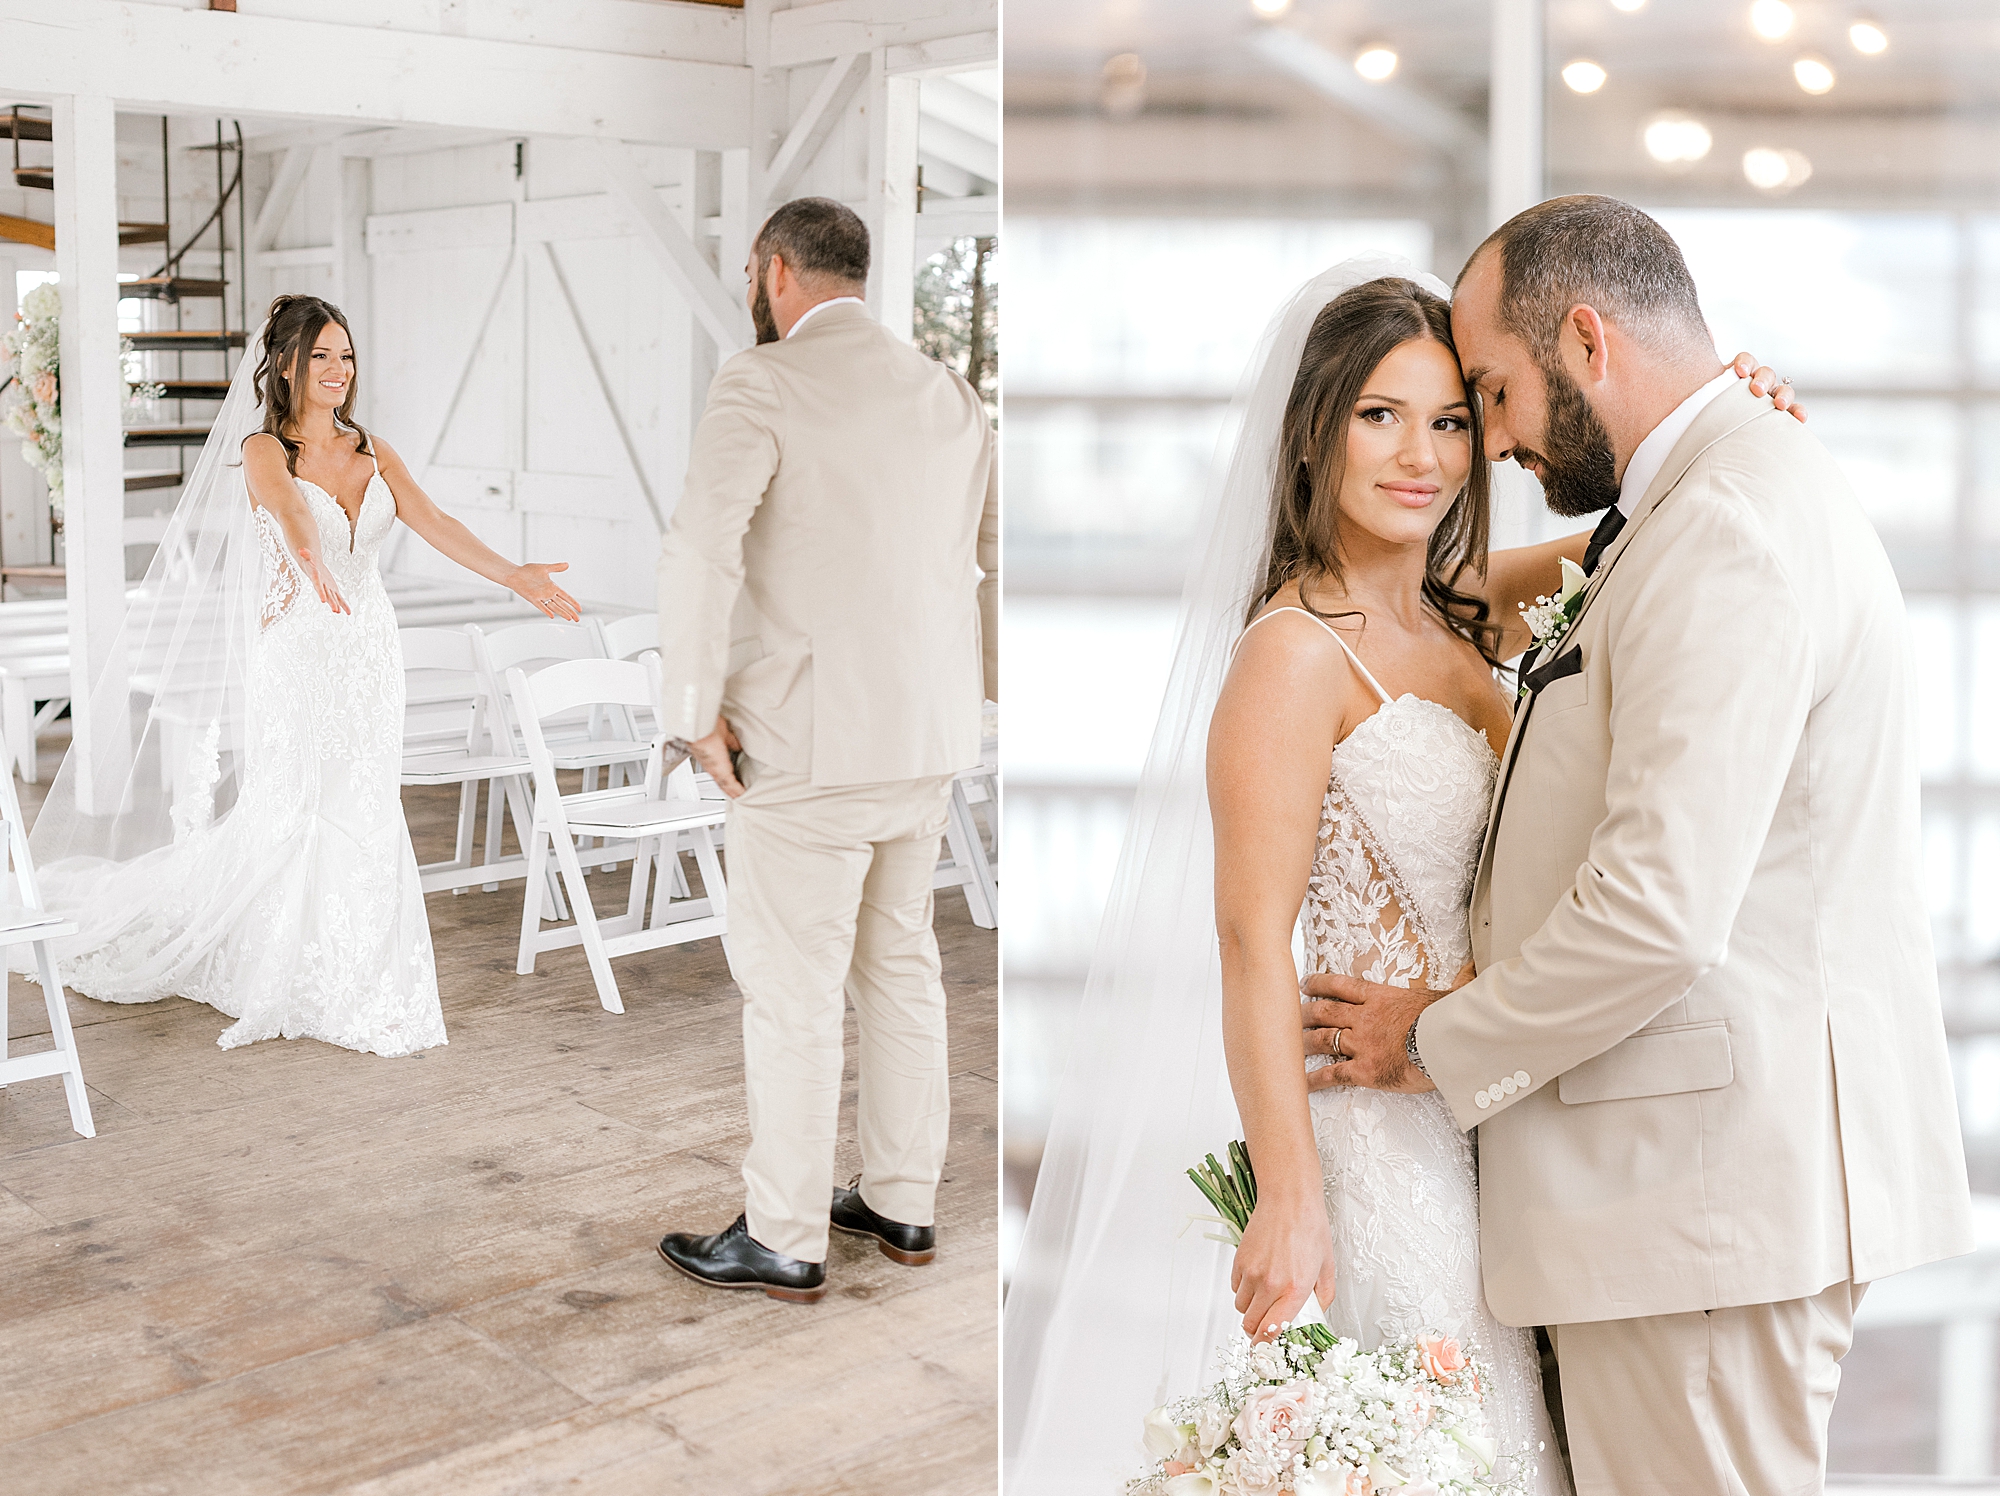 groom in tan suit leans into bride, hugging her after first look